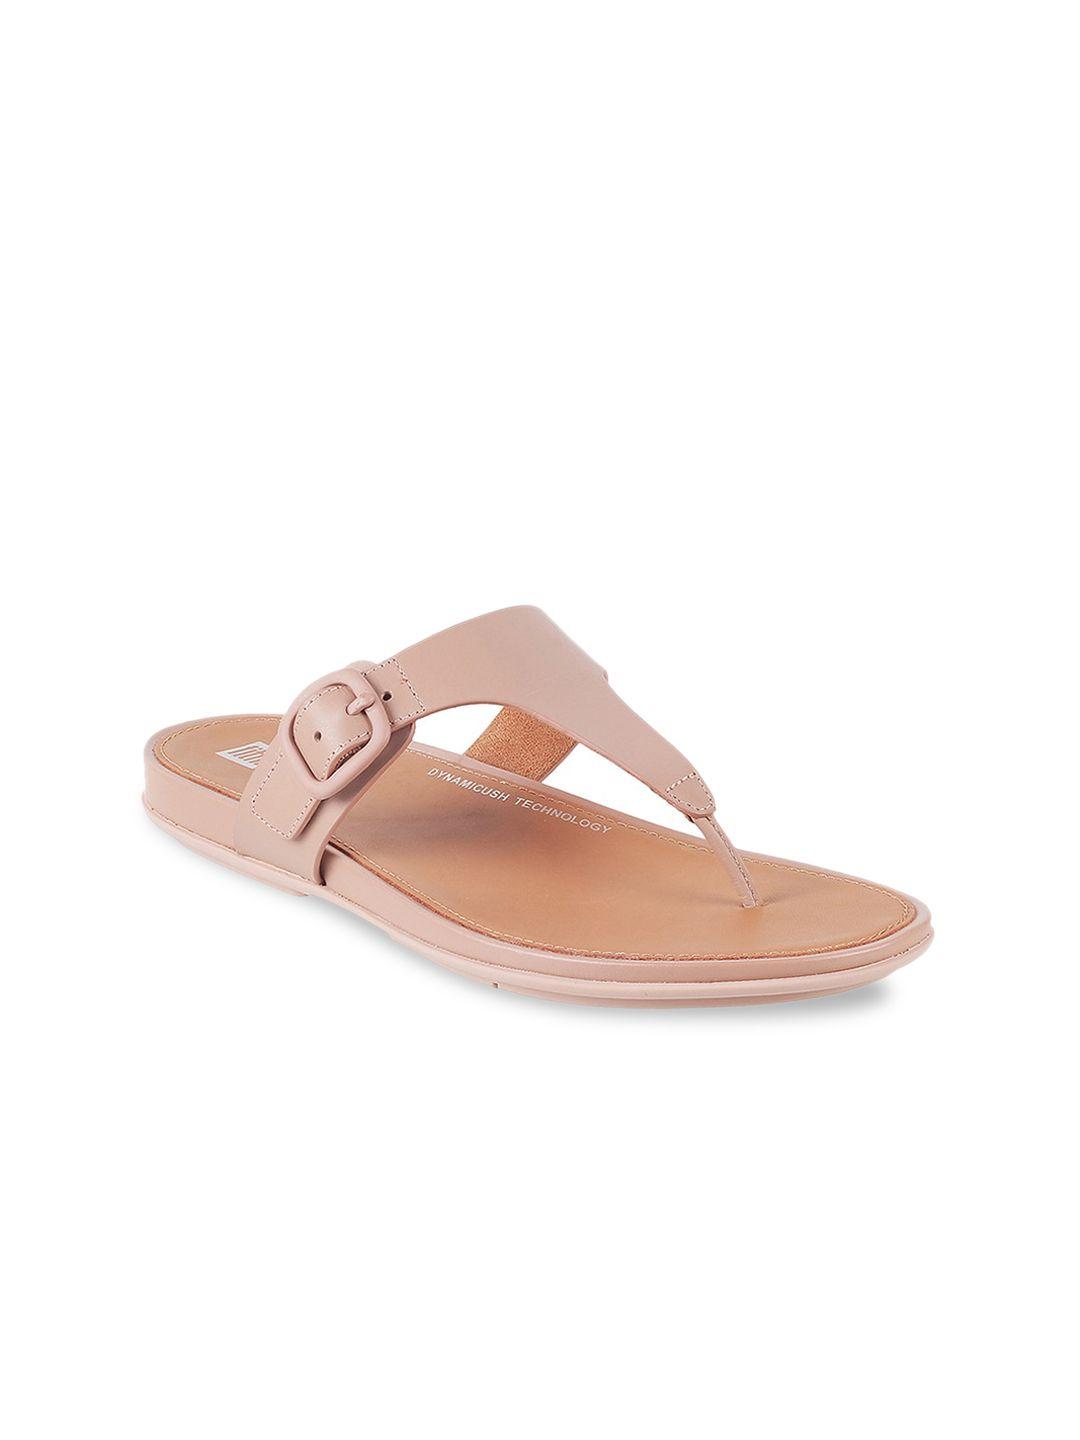 fitflop women beige t-strap flats with buckles